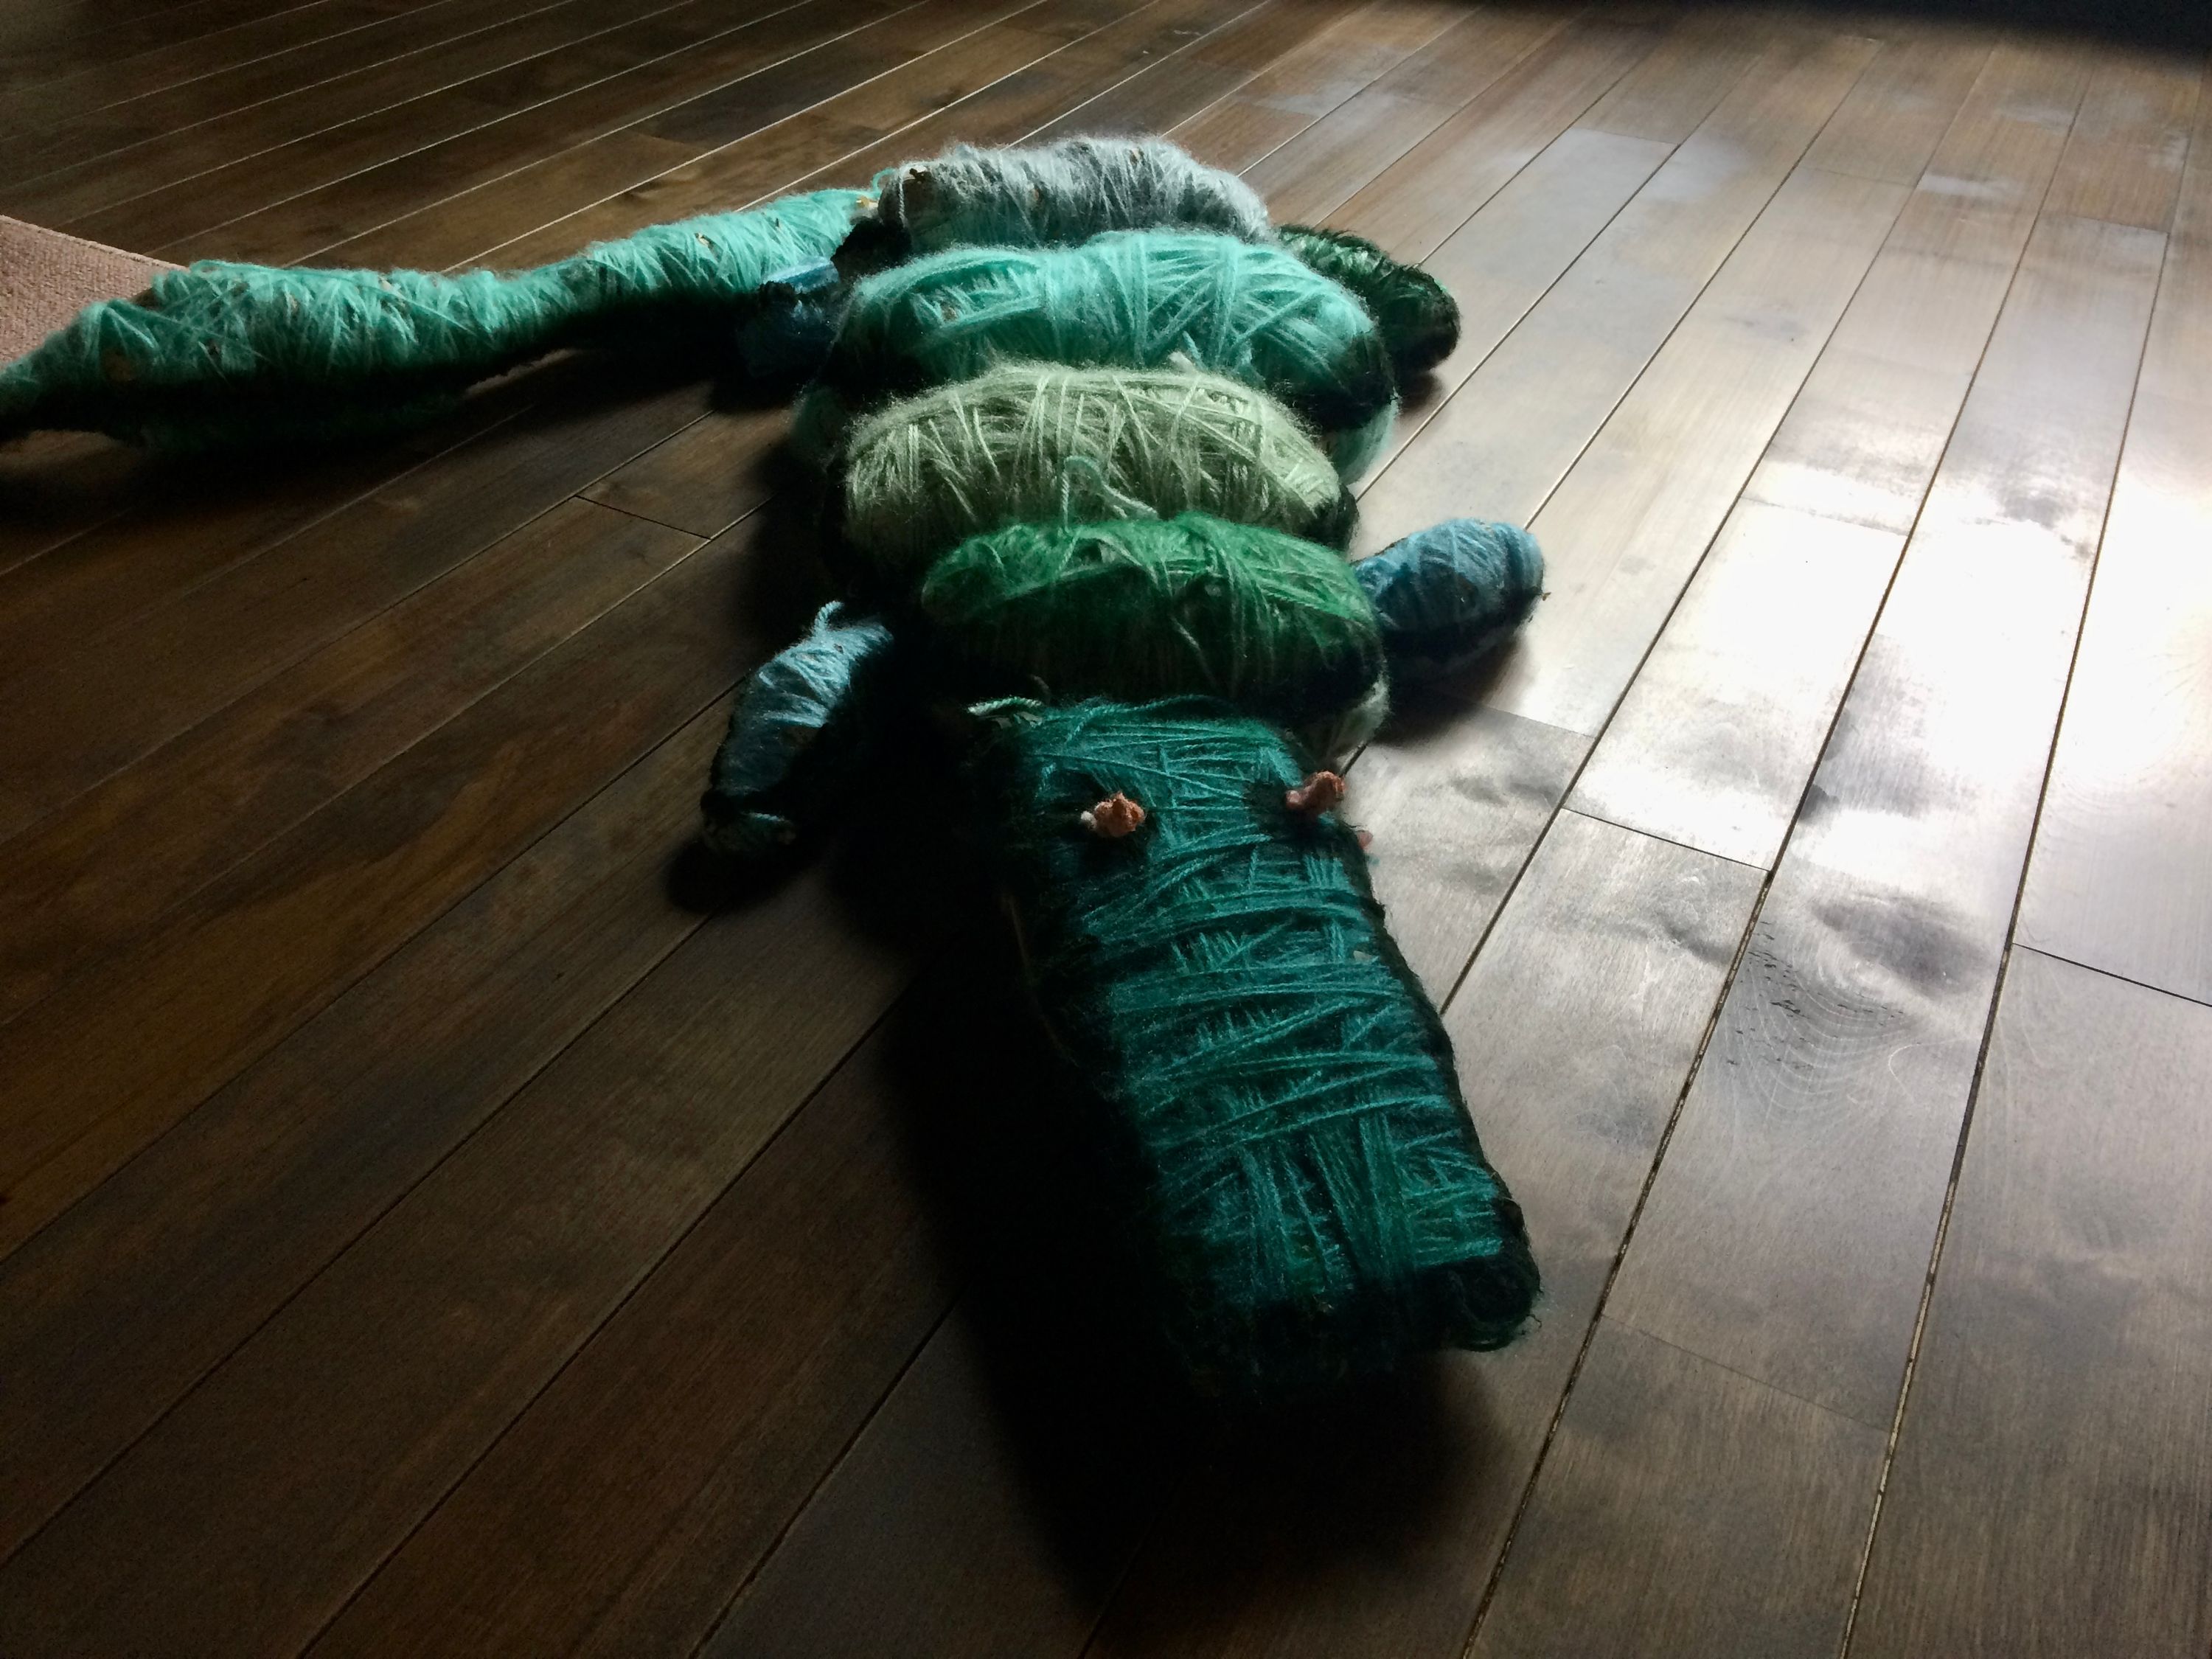 An alligator made of yarns of green wool rests on a polished wooden floor.